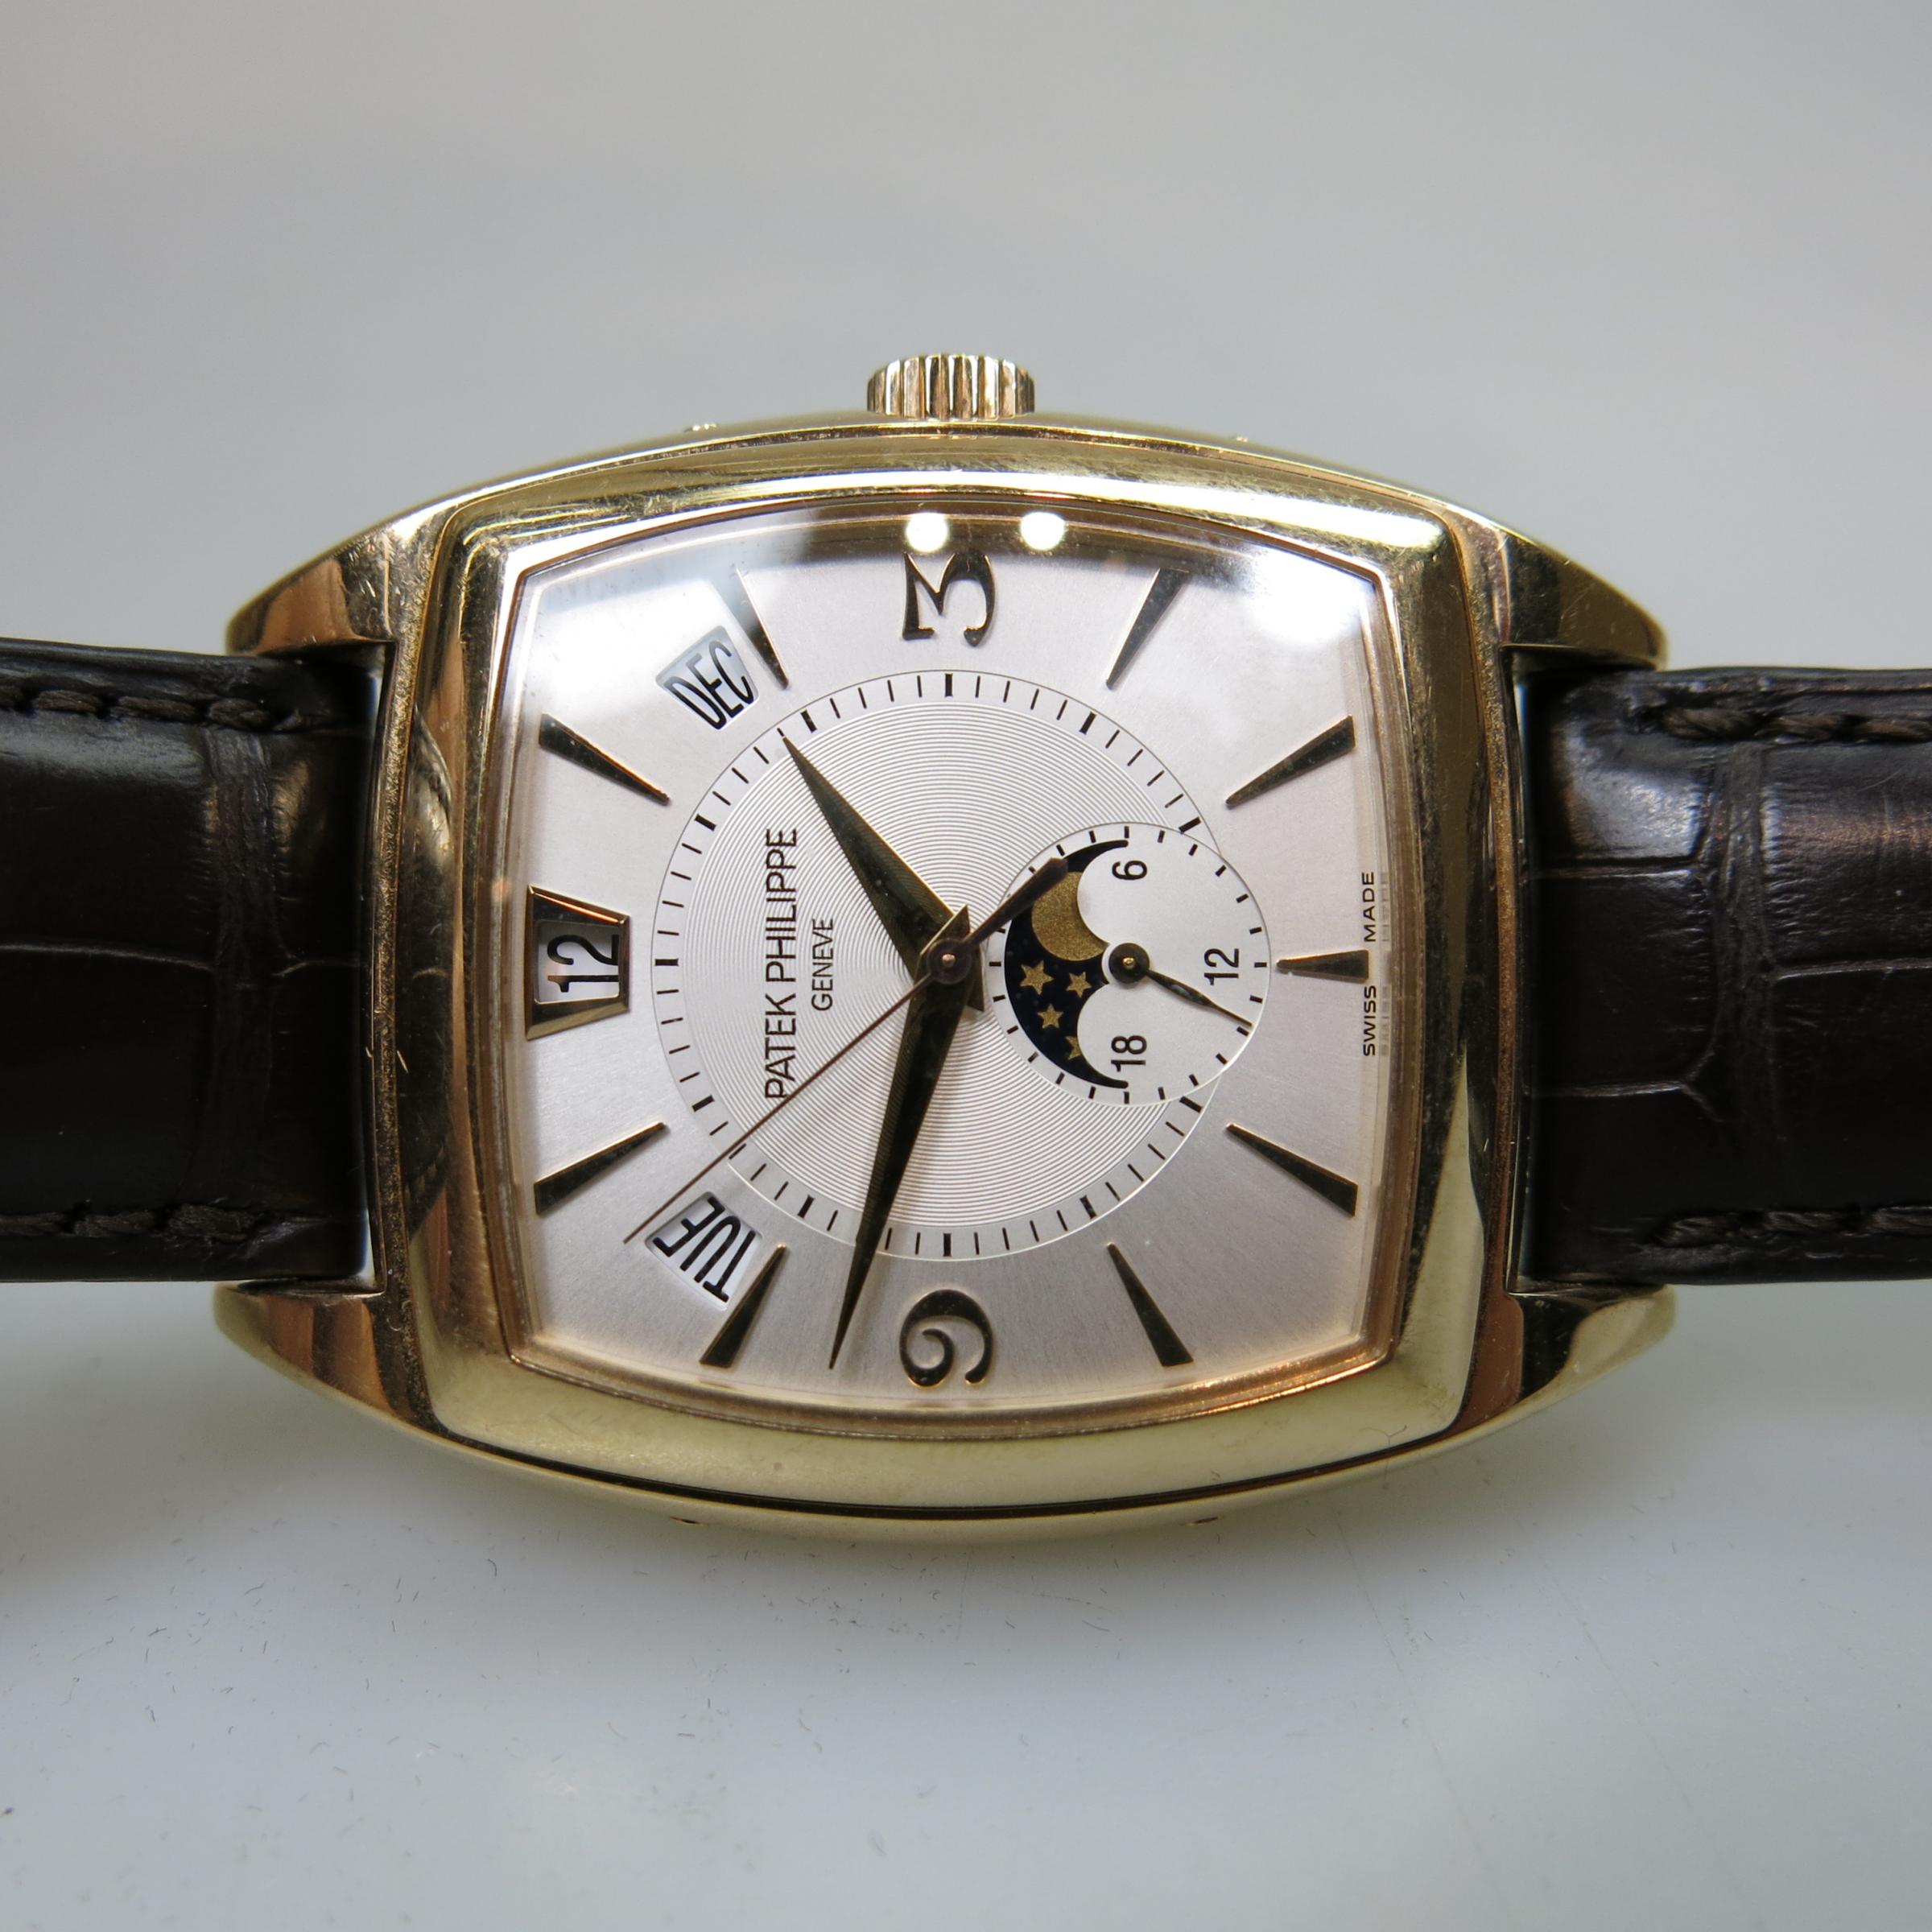 Patek Philippe 'Gondolo' Wristwatch With Triple Date And Moon Phase